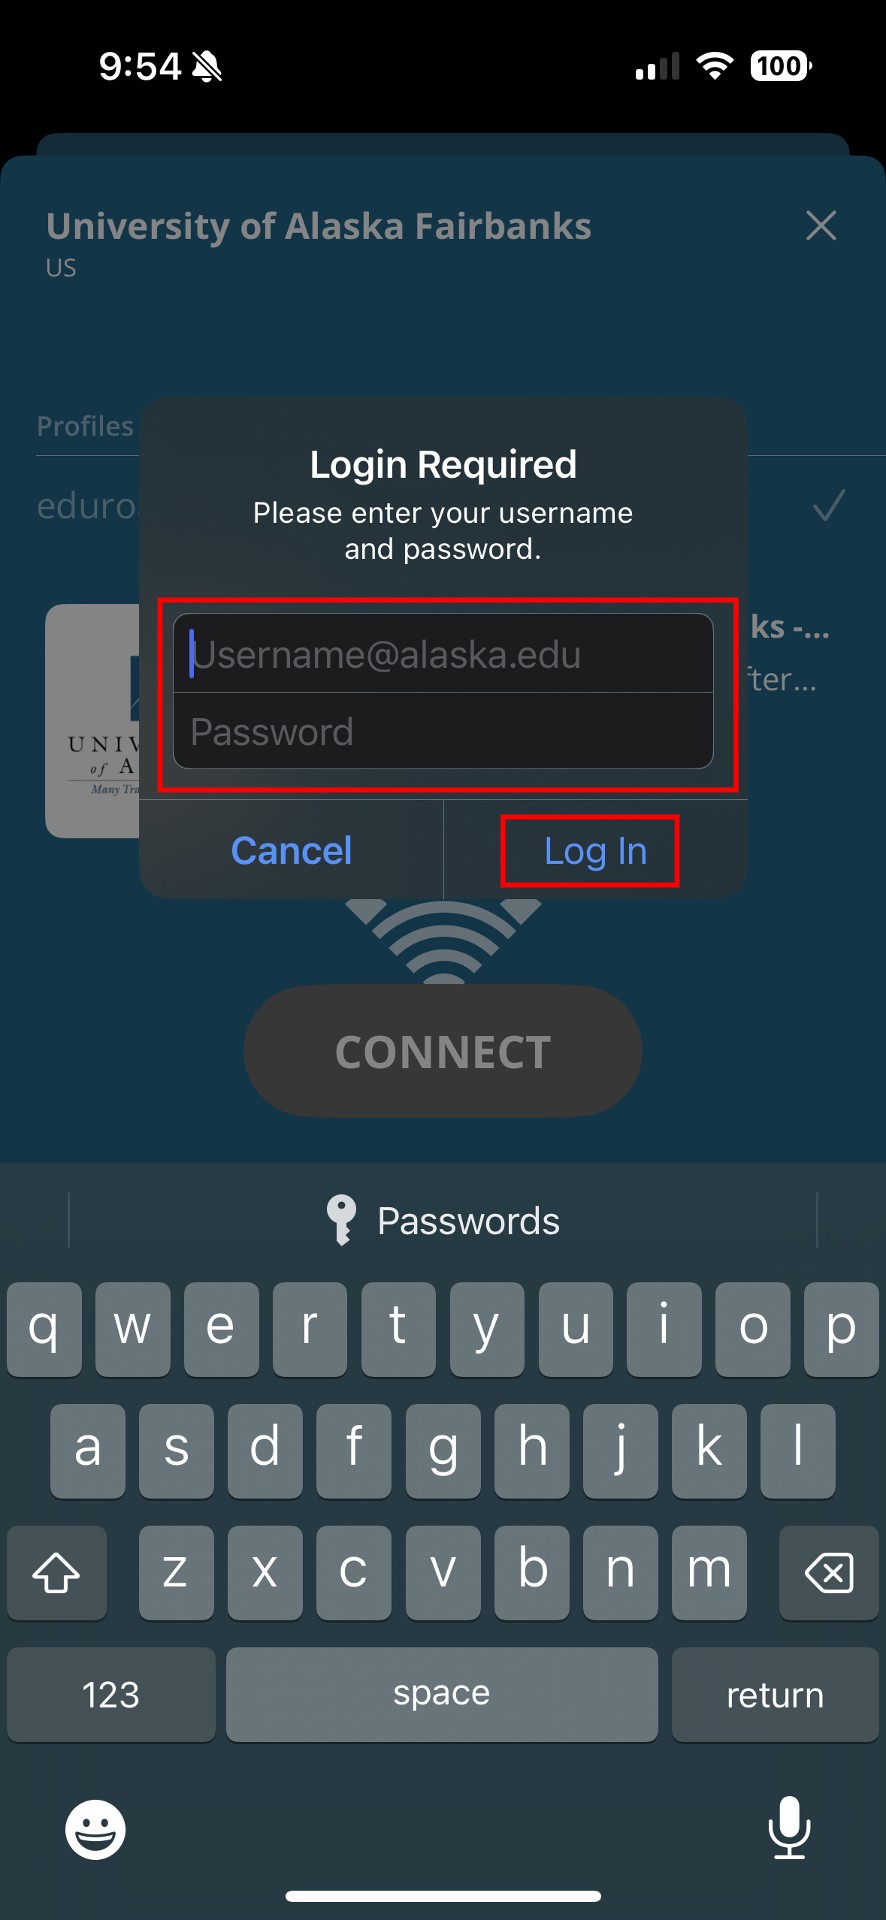 A login prompt within the geteduroam app. It says 'Login Required. Please enter your username and password.' With a field for each. The 'Log In' button option is highlighted to the right. A keyboard is visible at the bottom of the screen.